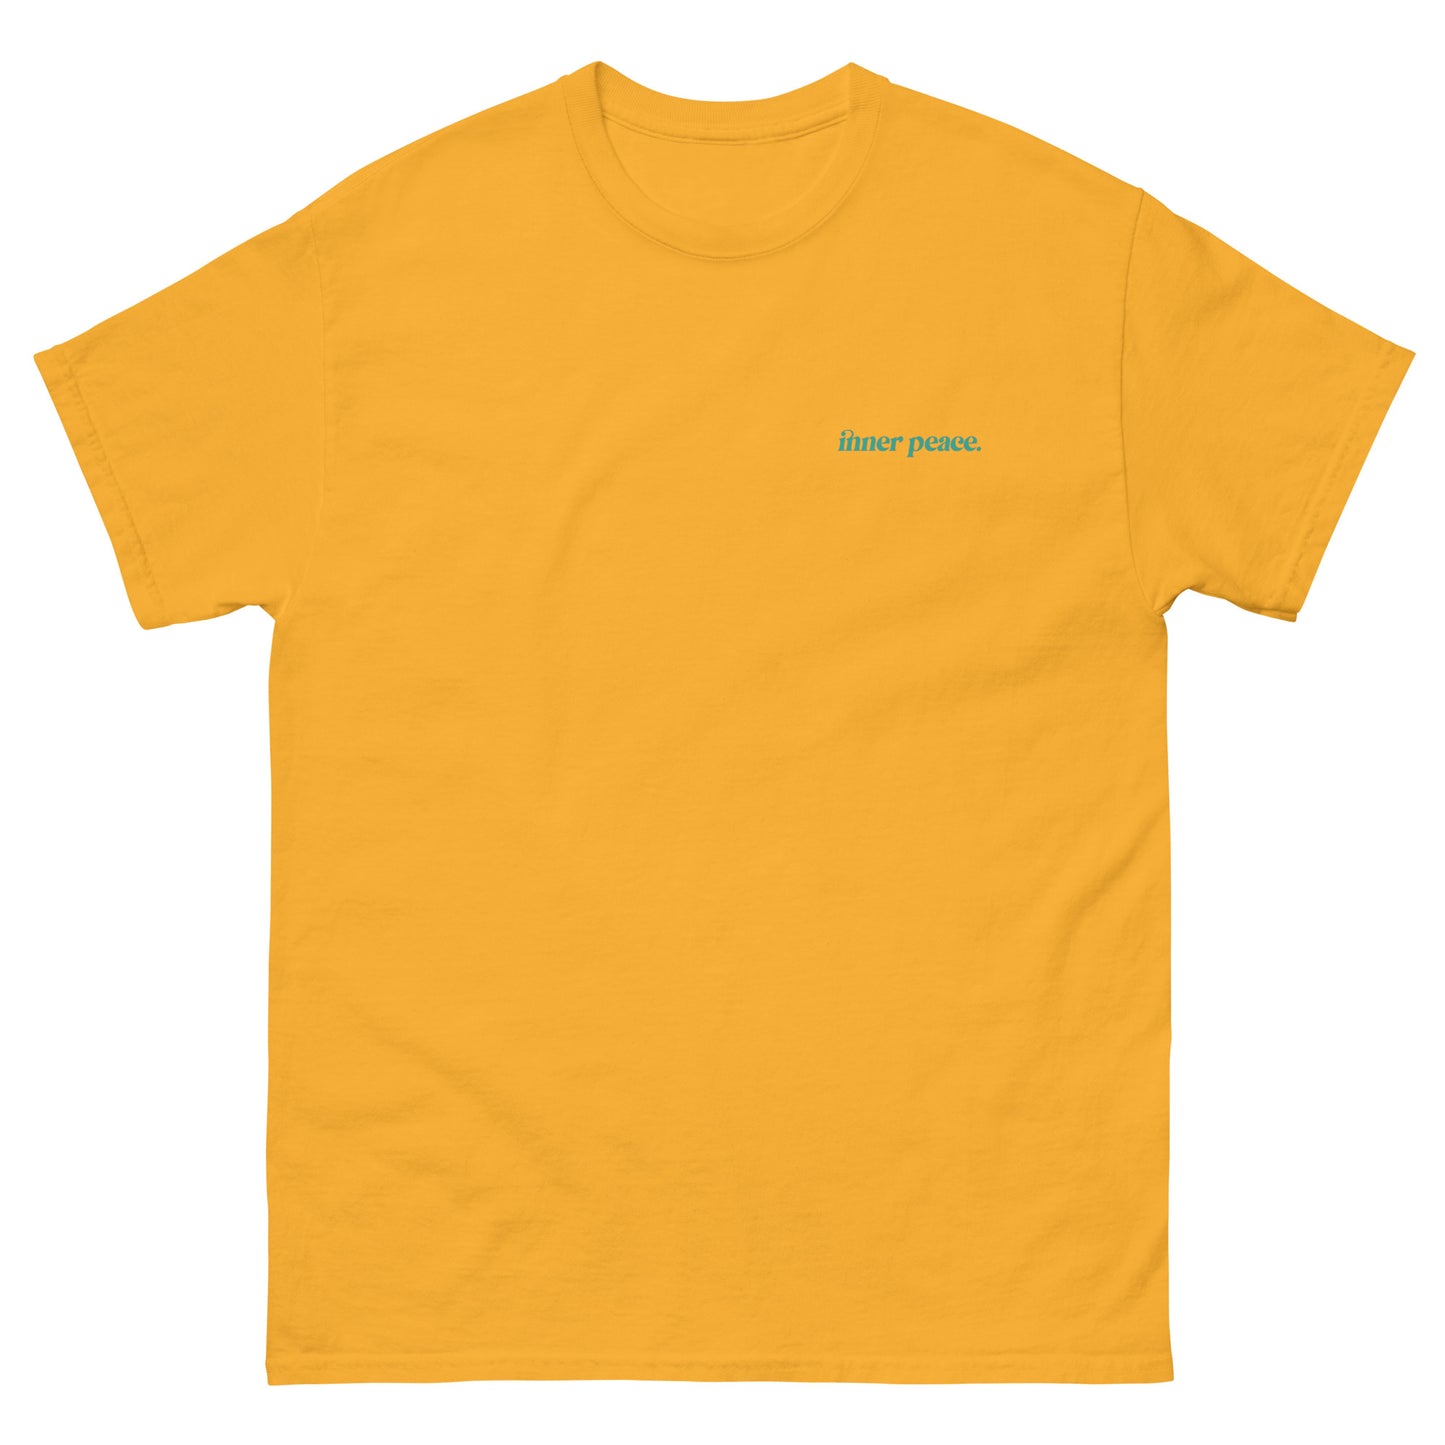 Yellow High Quality Tee - Front Design with "inner peace " print on left chest - Back Design with a Phrase "You know what's the real luxury? Your inner peace." print